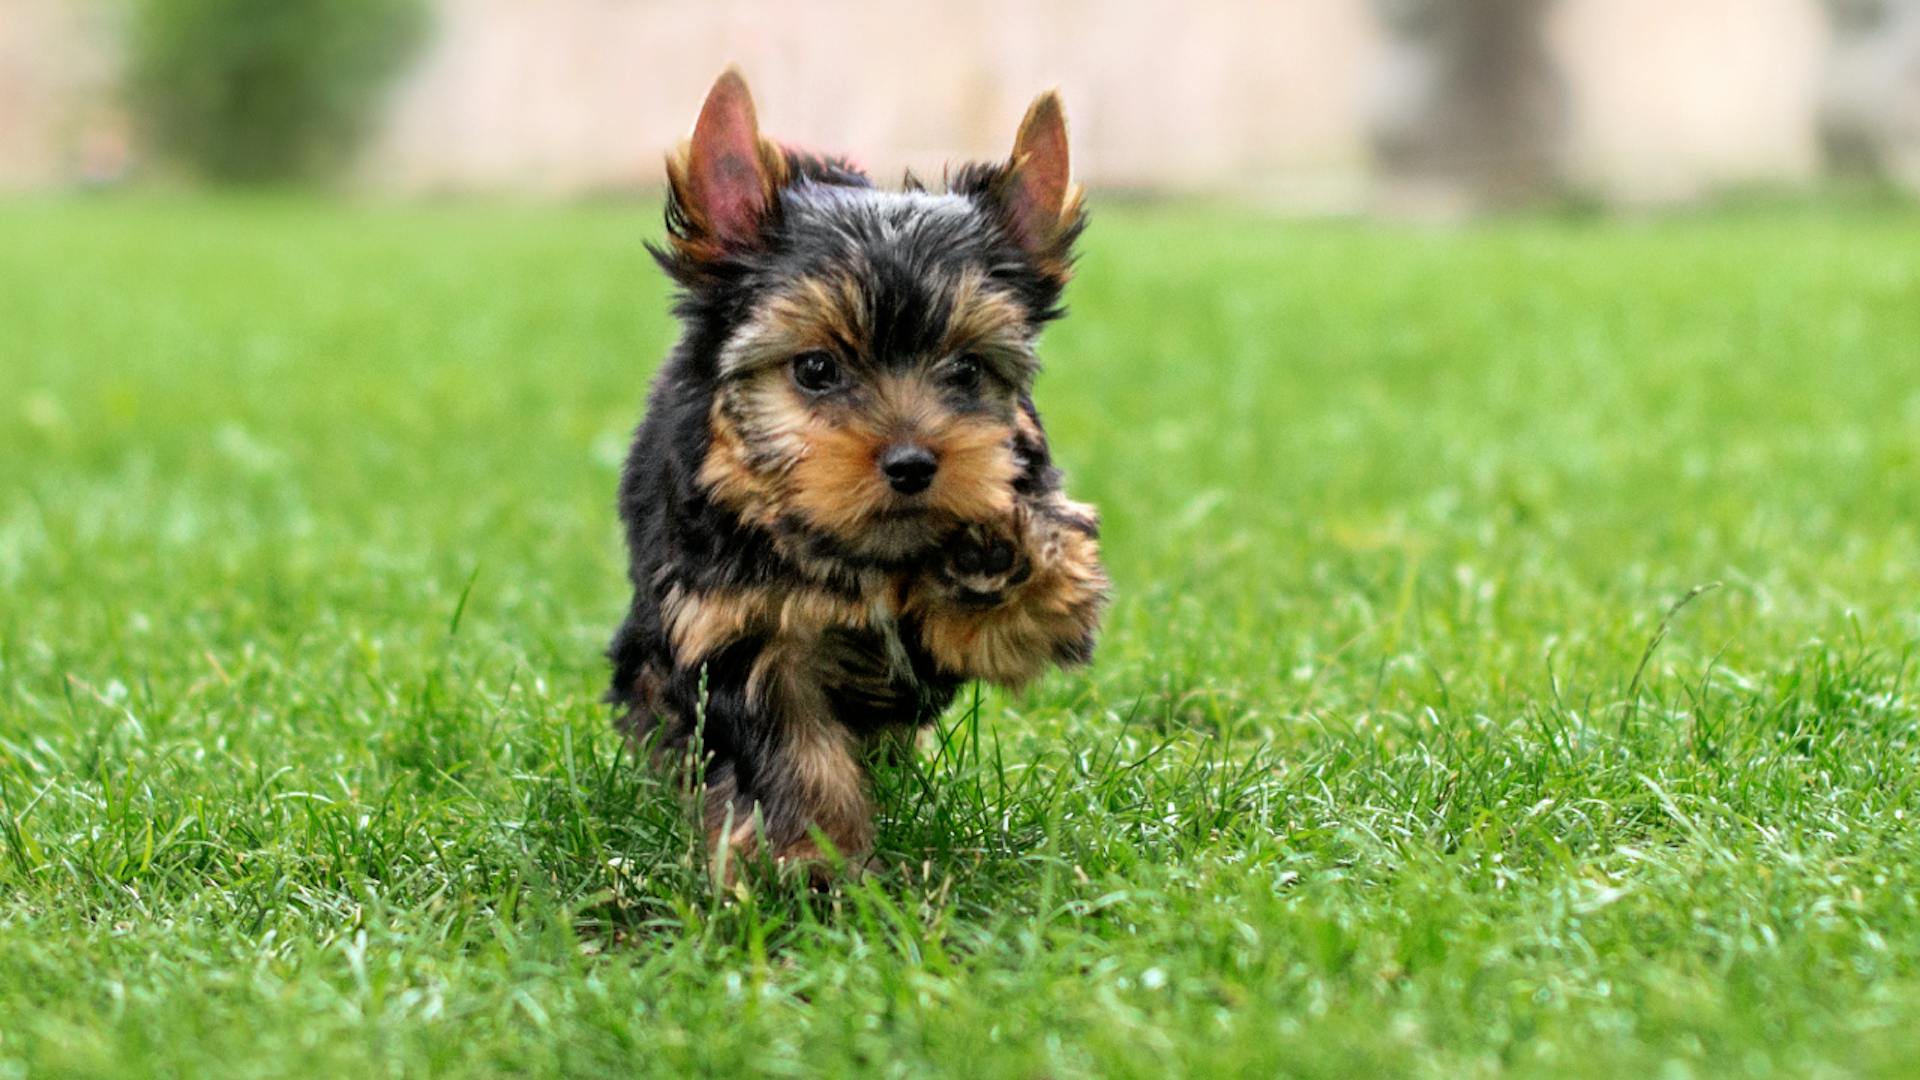 A Yorkshire Terrier.